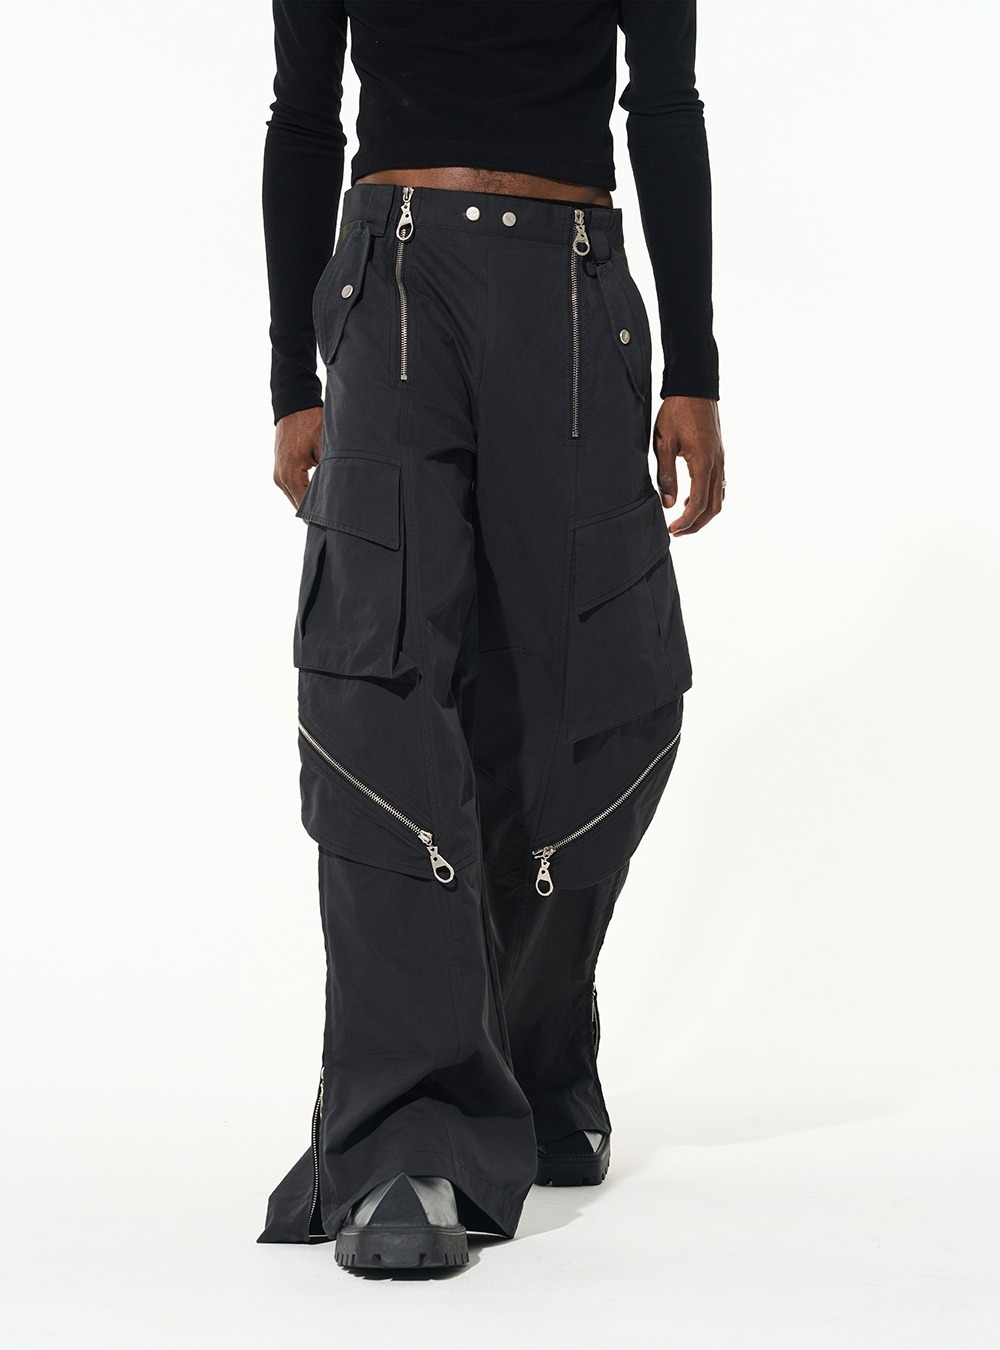 [BLIND NO PLAN] Multi-Zipper Patchwork Overall High Street Pants (2color)